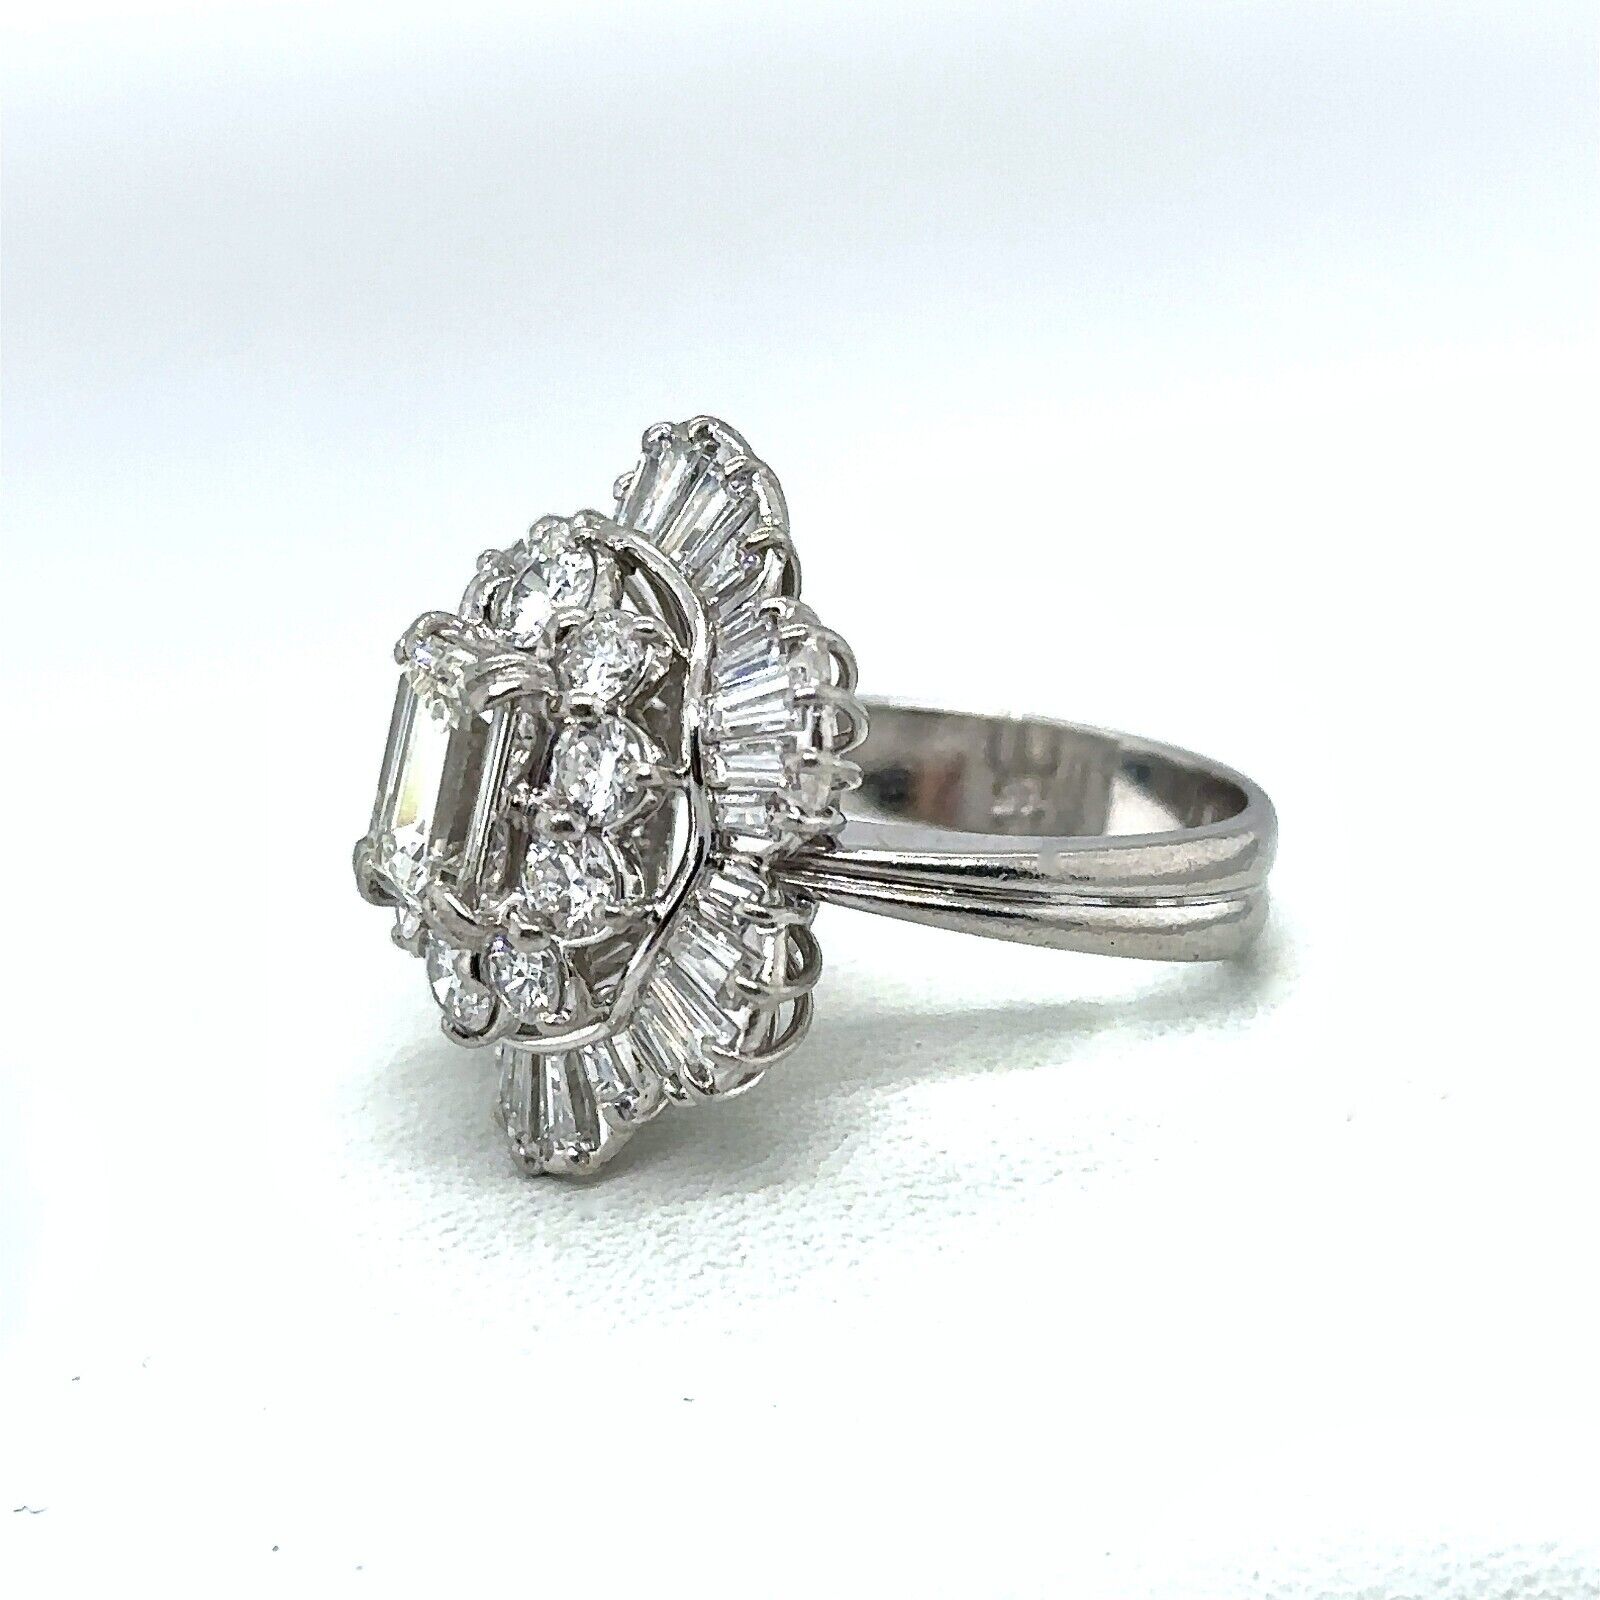 Awesome 3.06CT Diamond Vintage Ring GIA Report - image 6